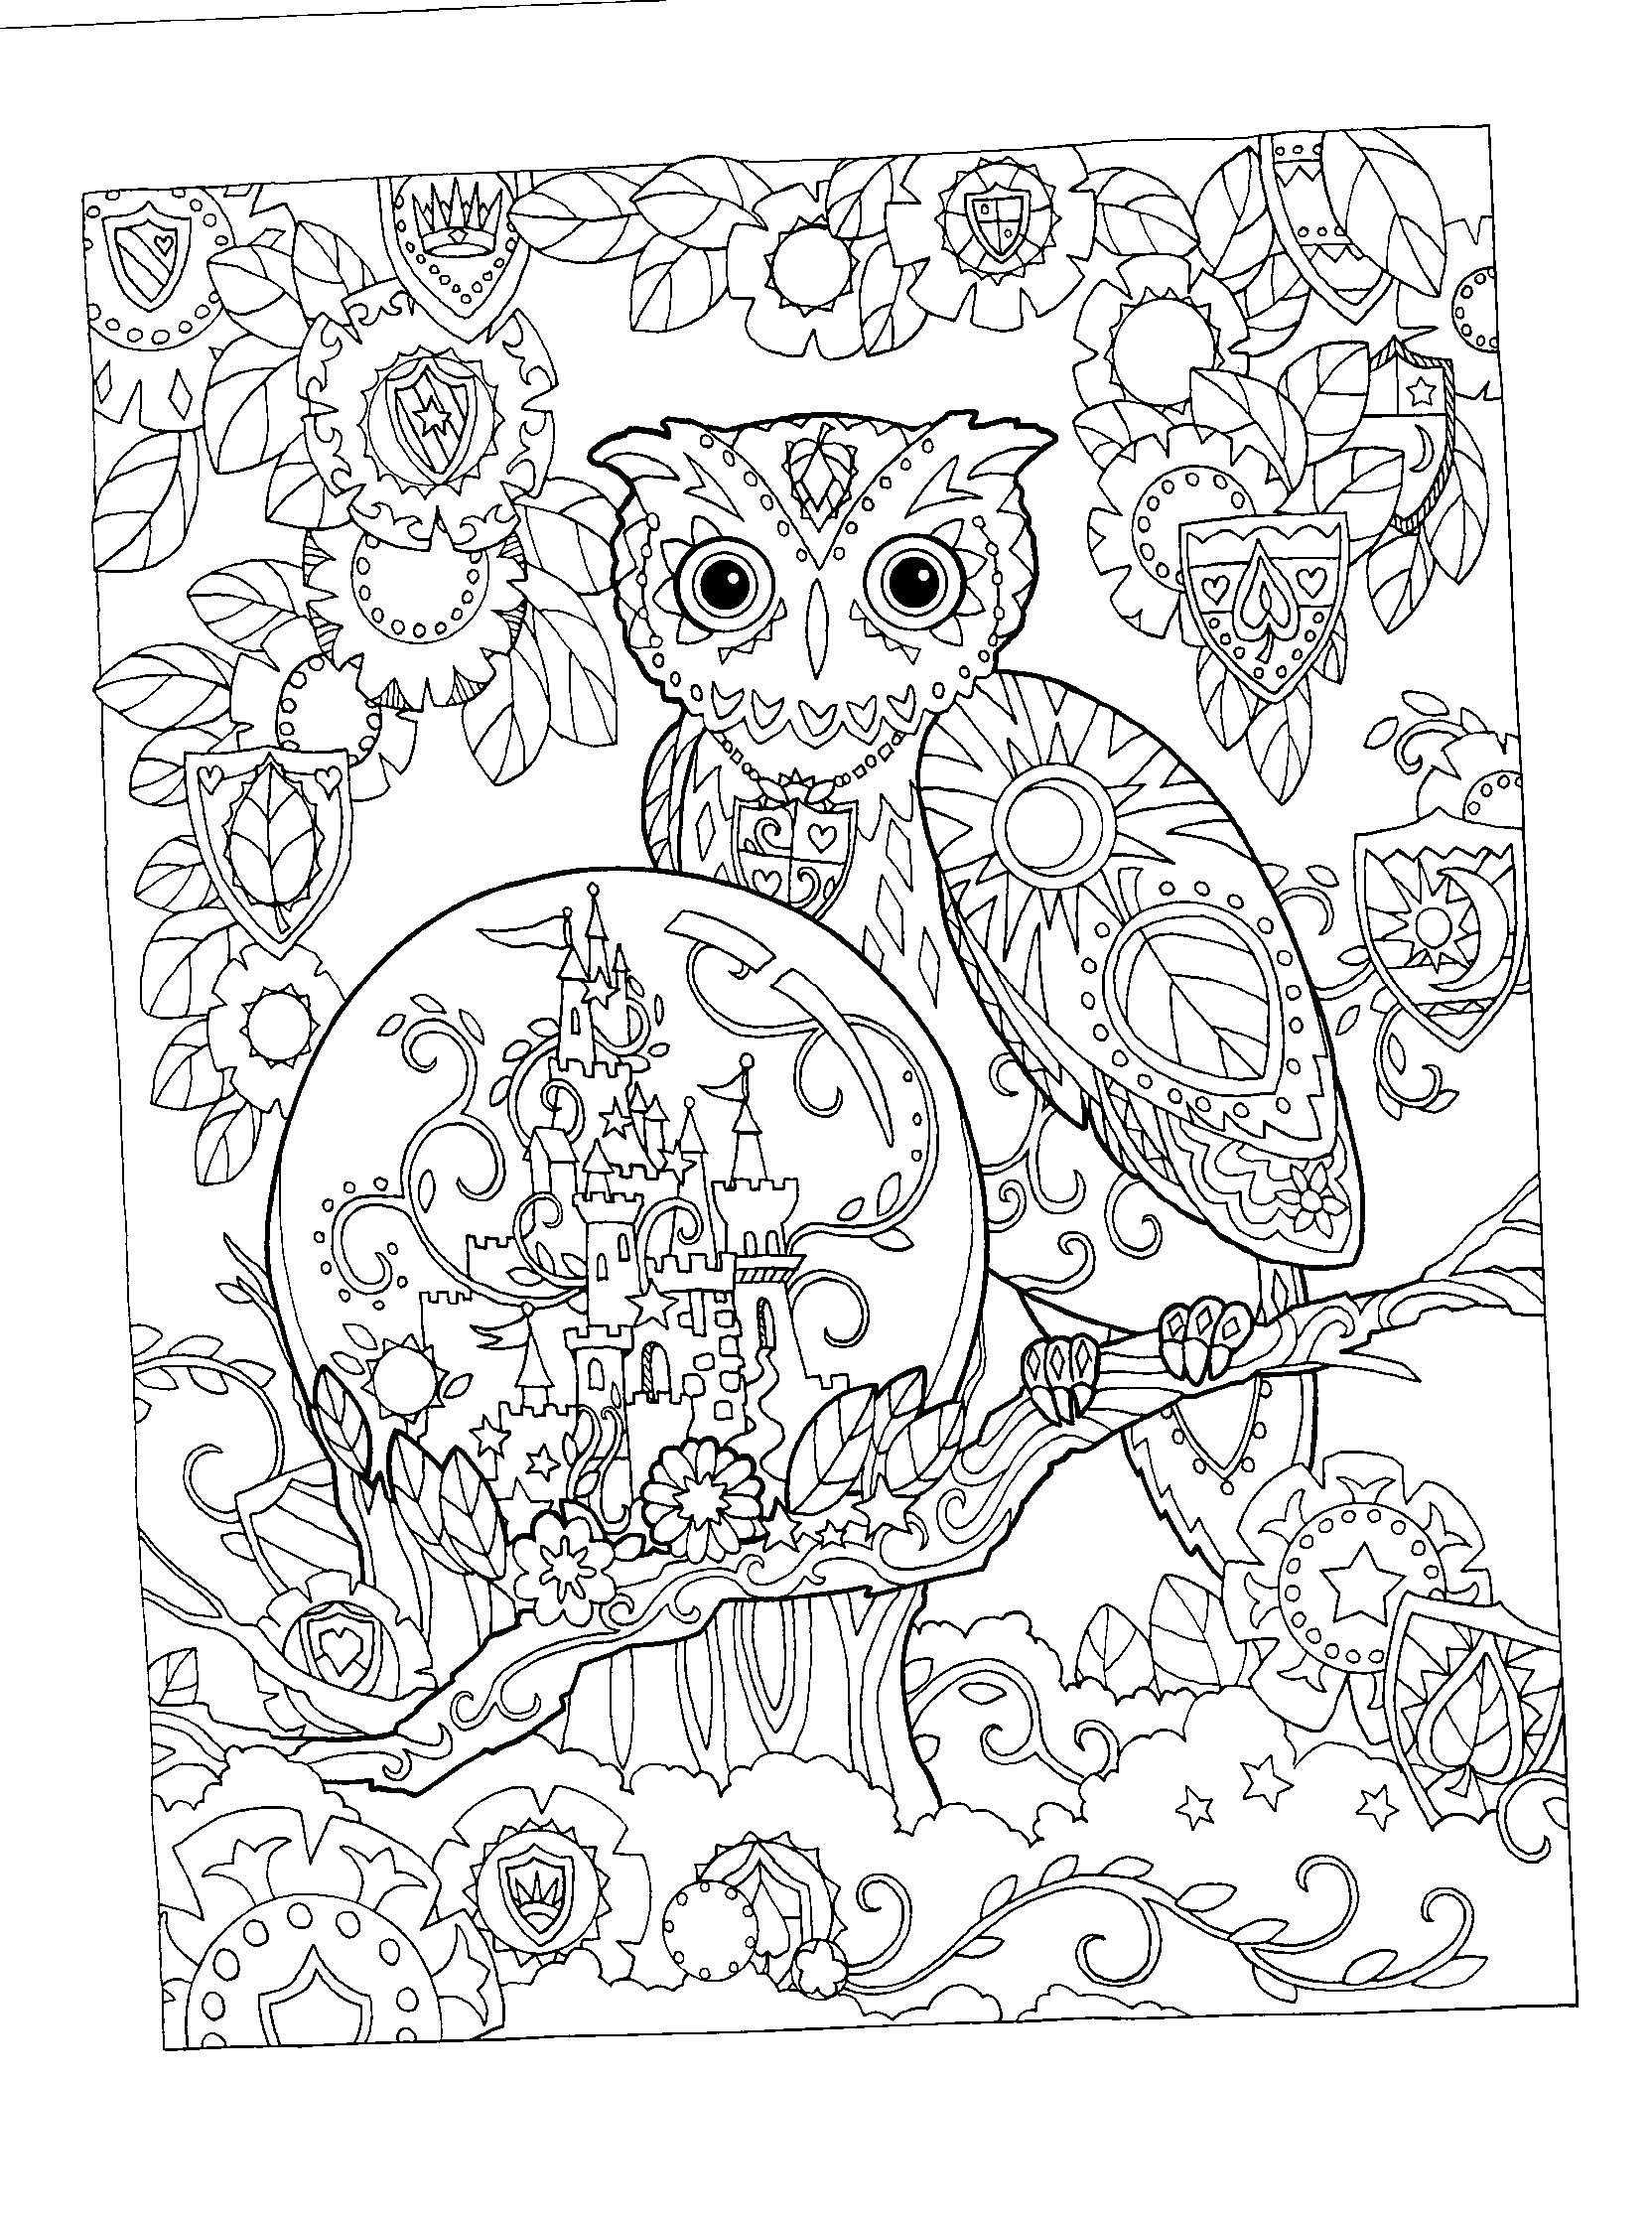 Adult Coloring Pages Animal Patterns
 Adult Coloring Pages Animal Patterns Owl Download Free